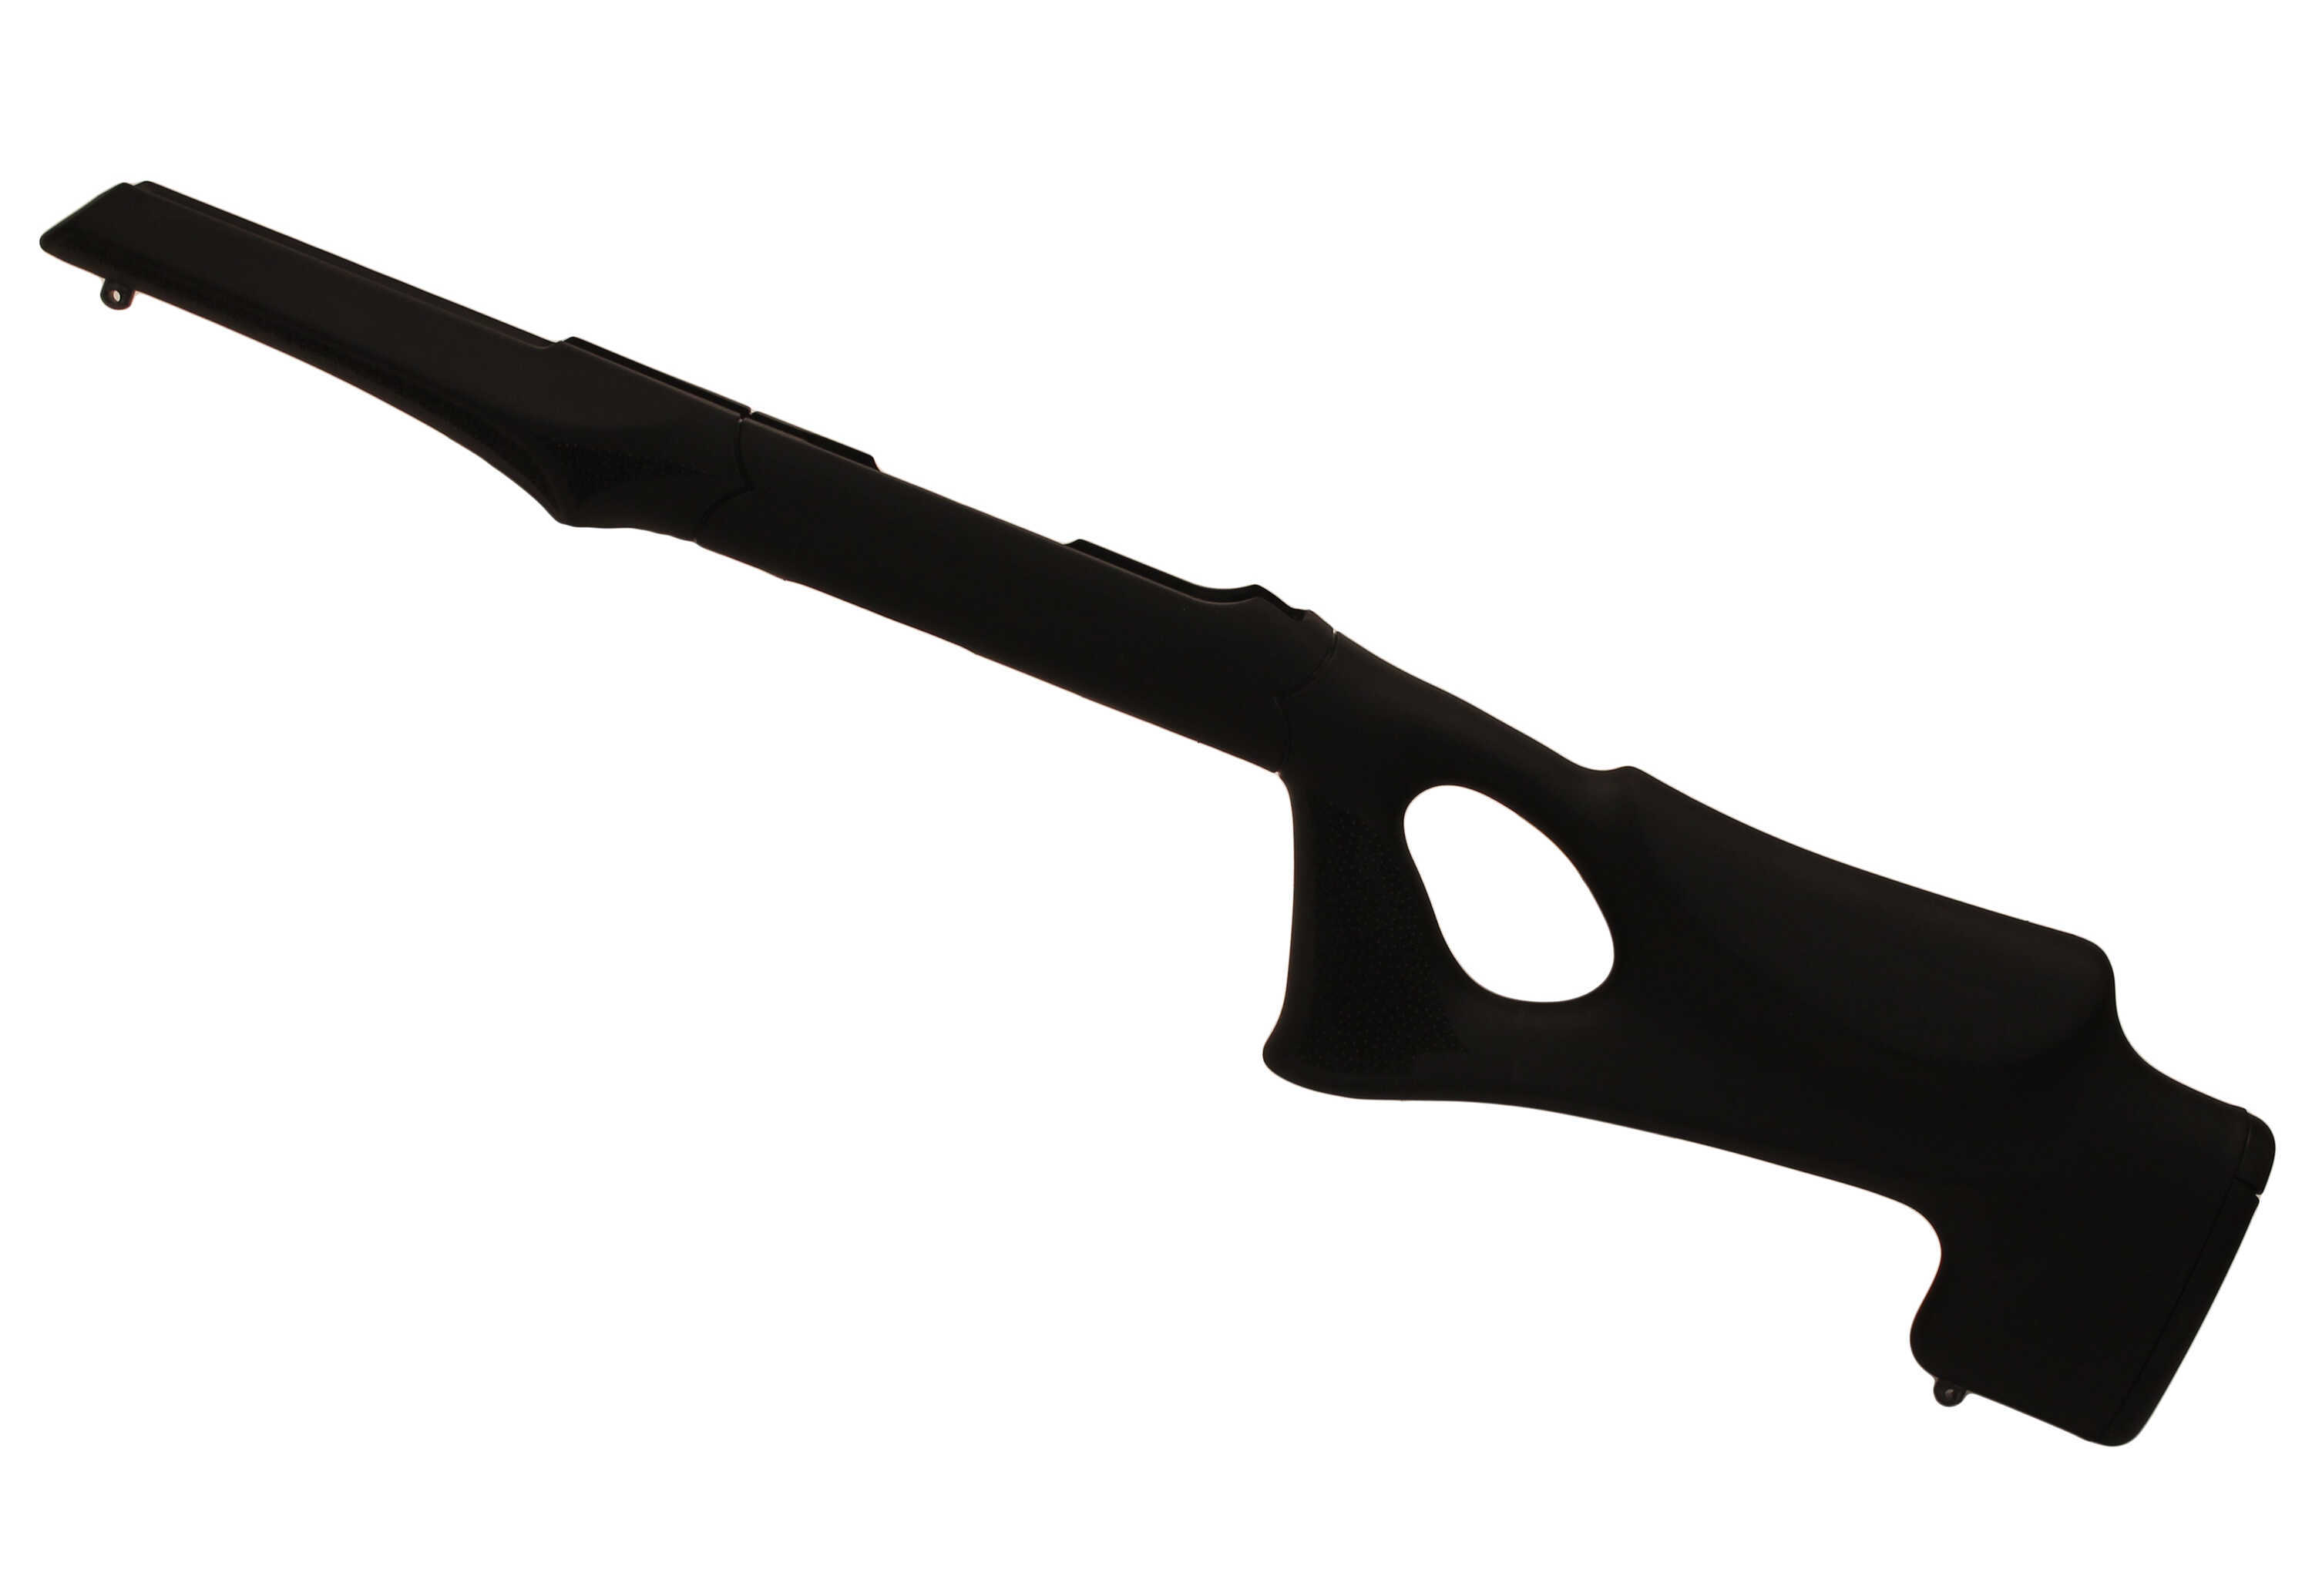 Hogue 10-22 Tactical Thumbhole Stock .920 Barrel Channel Black Overmolded Rubber